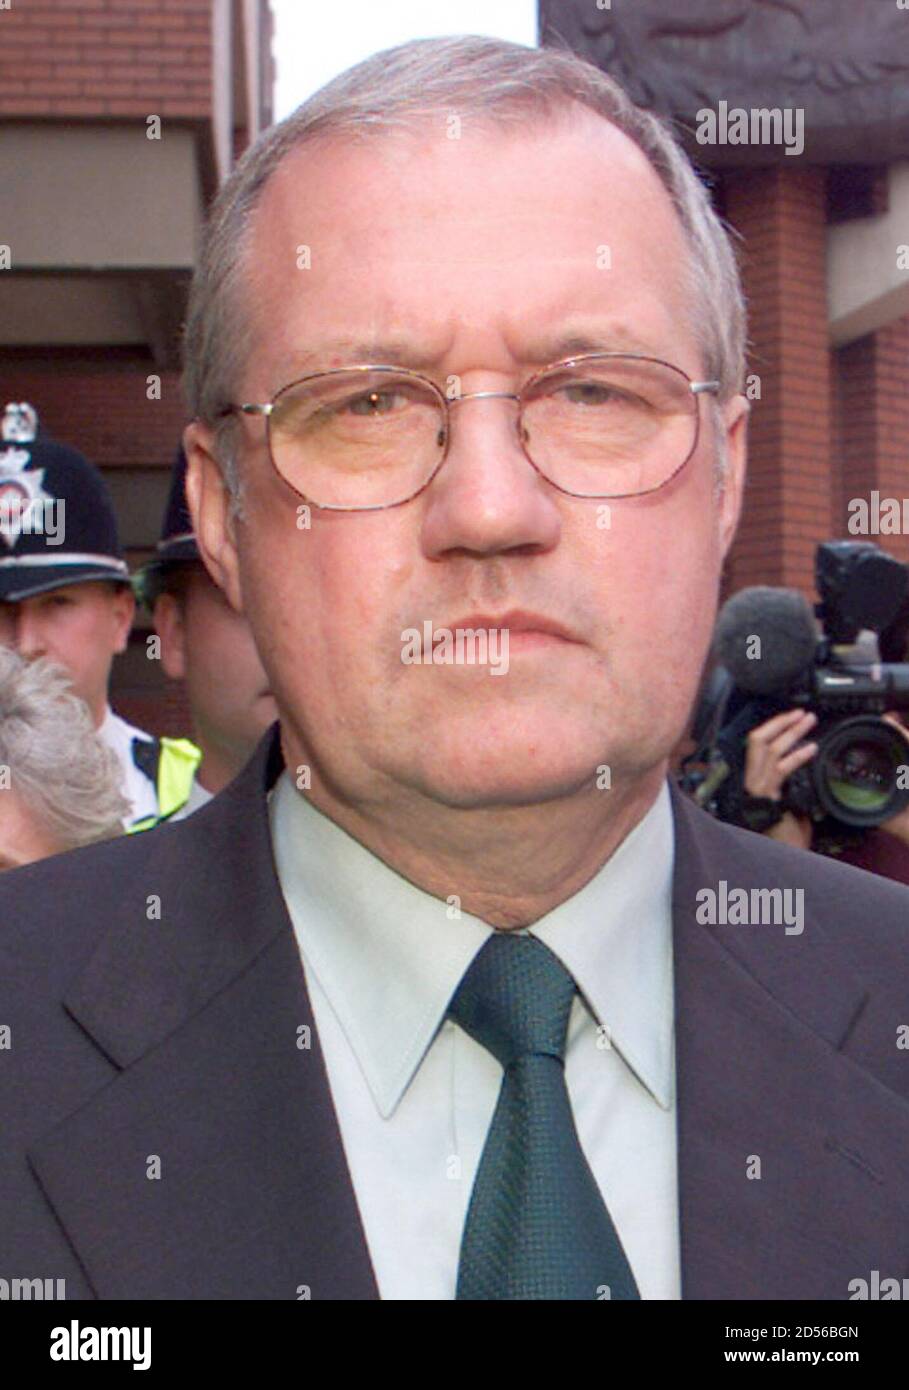 Former South Yorkshire Police Chief Superintendent David Duckinfield leaves Leeds Crown Court after the jury failed to reach a verdict and were sent home for the weekend July 21. David Duckinfield is charged with manslaughter and wilful neglect of duty in the first criminal proceedings to follow the Hillsborough tragedy in which 96 Liverpool soccer fans were crushed to death at the 1989 FA Cup Semi final.  DC/WS Stock Photo